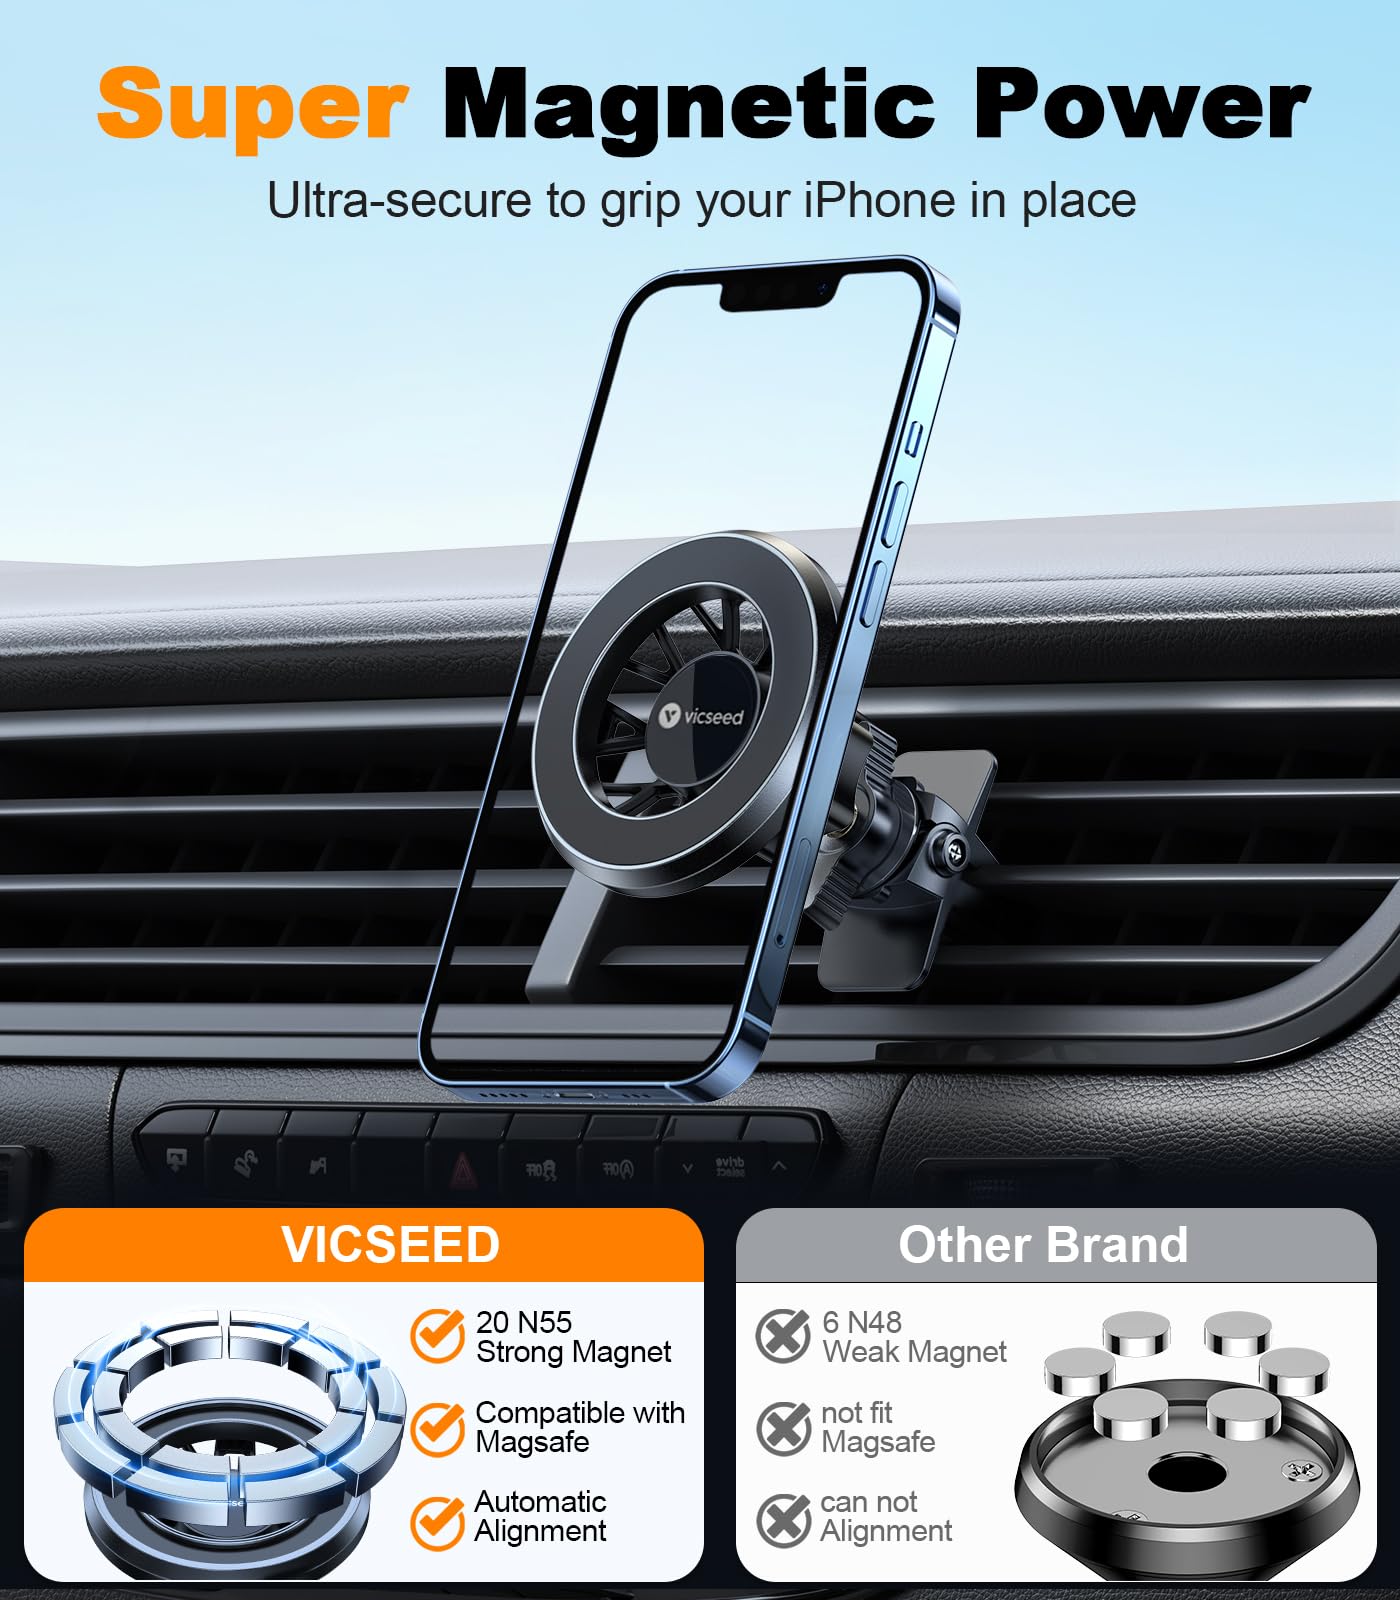 VICSEED MagSafe Car Mount: Strong Magnetic Holder for Hands-Free Phone Use